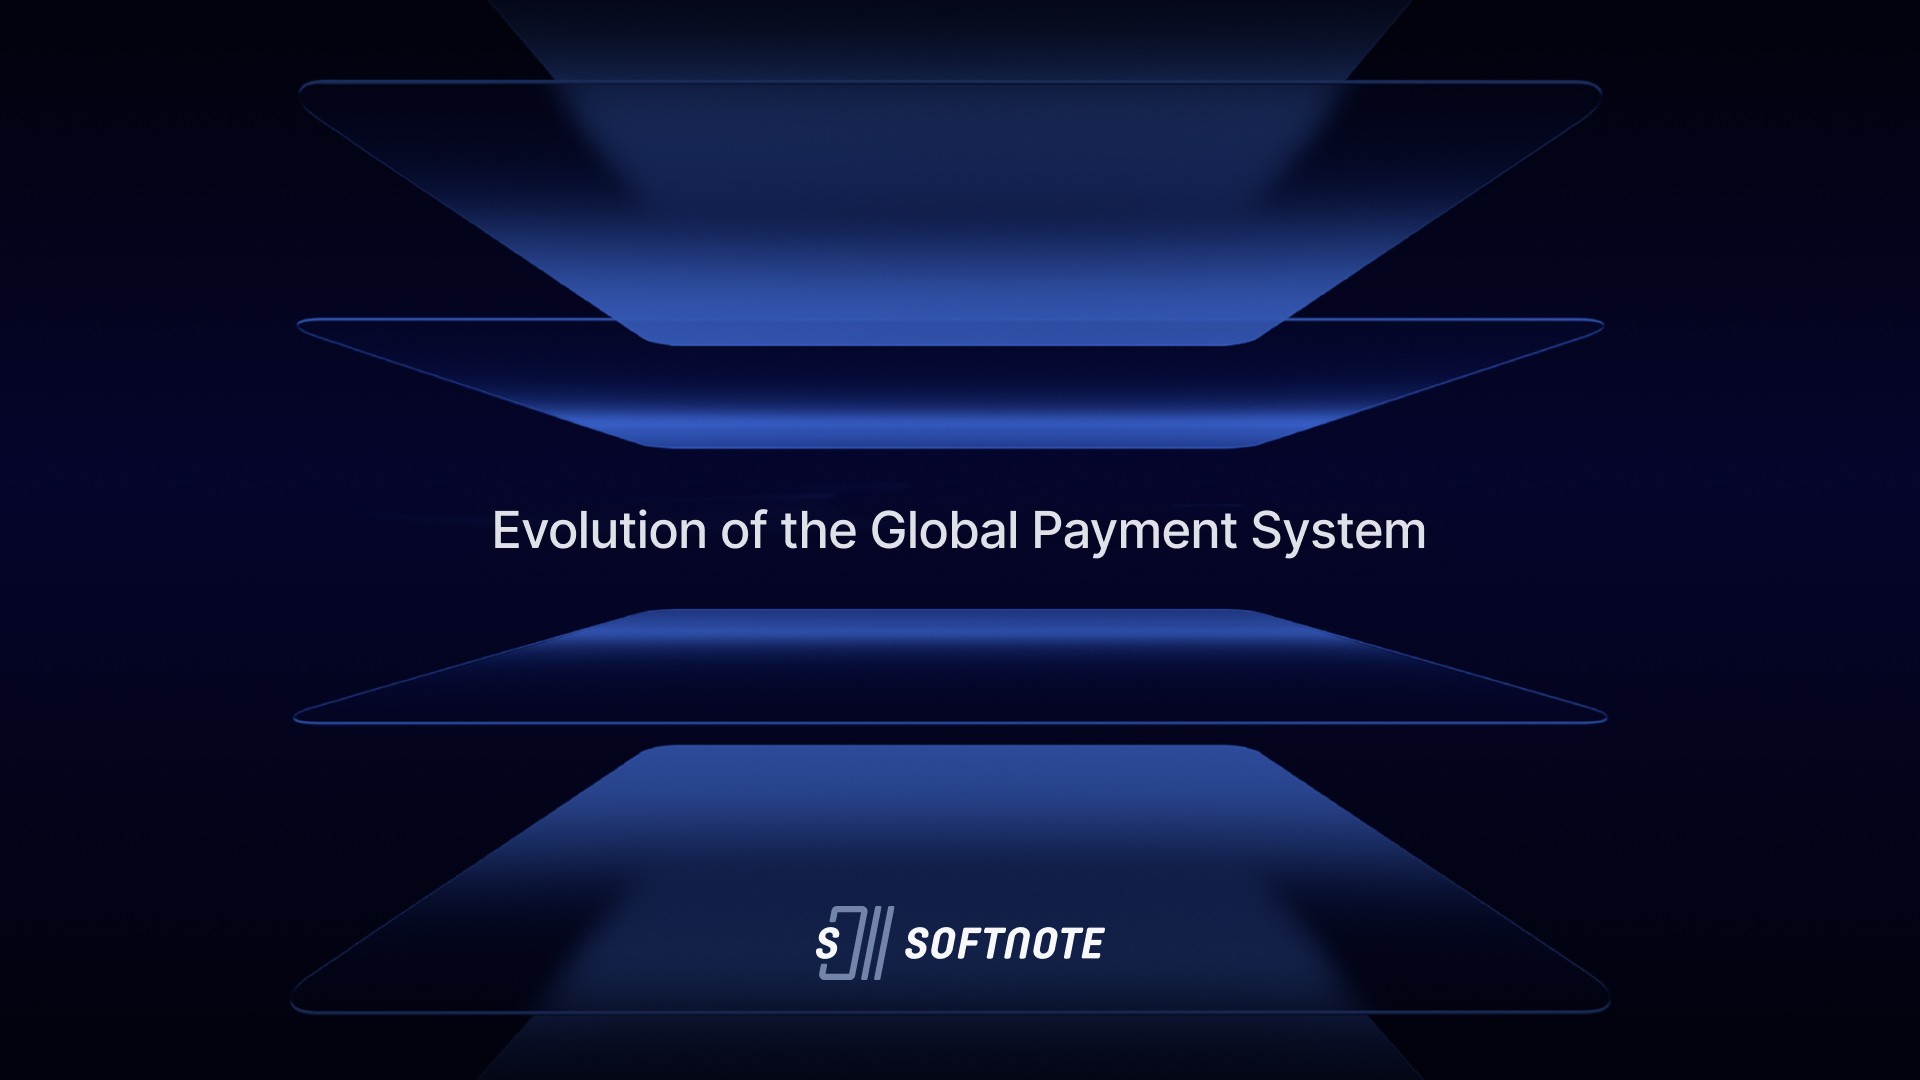 SoftNote – a True Evolution of the Global Payment System